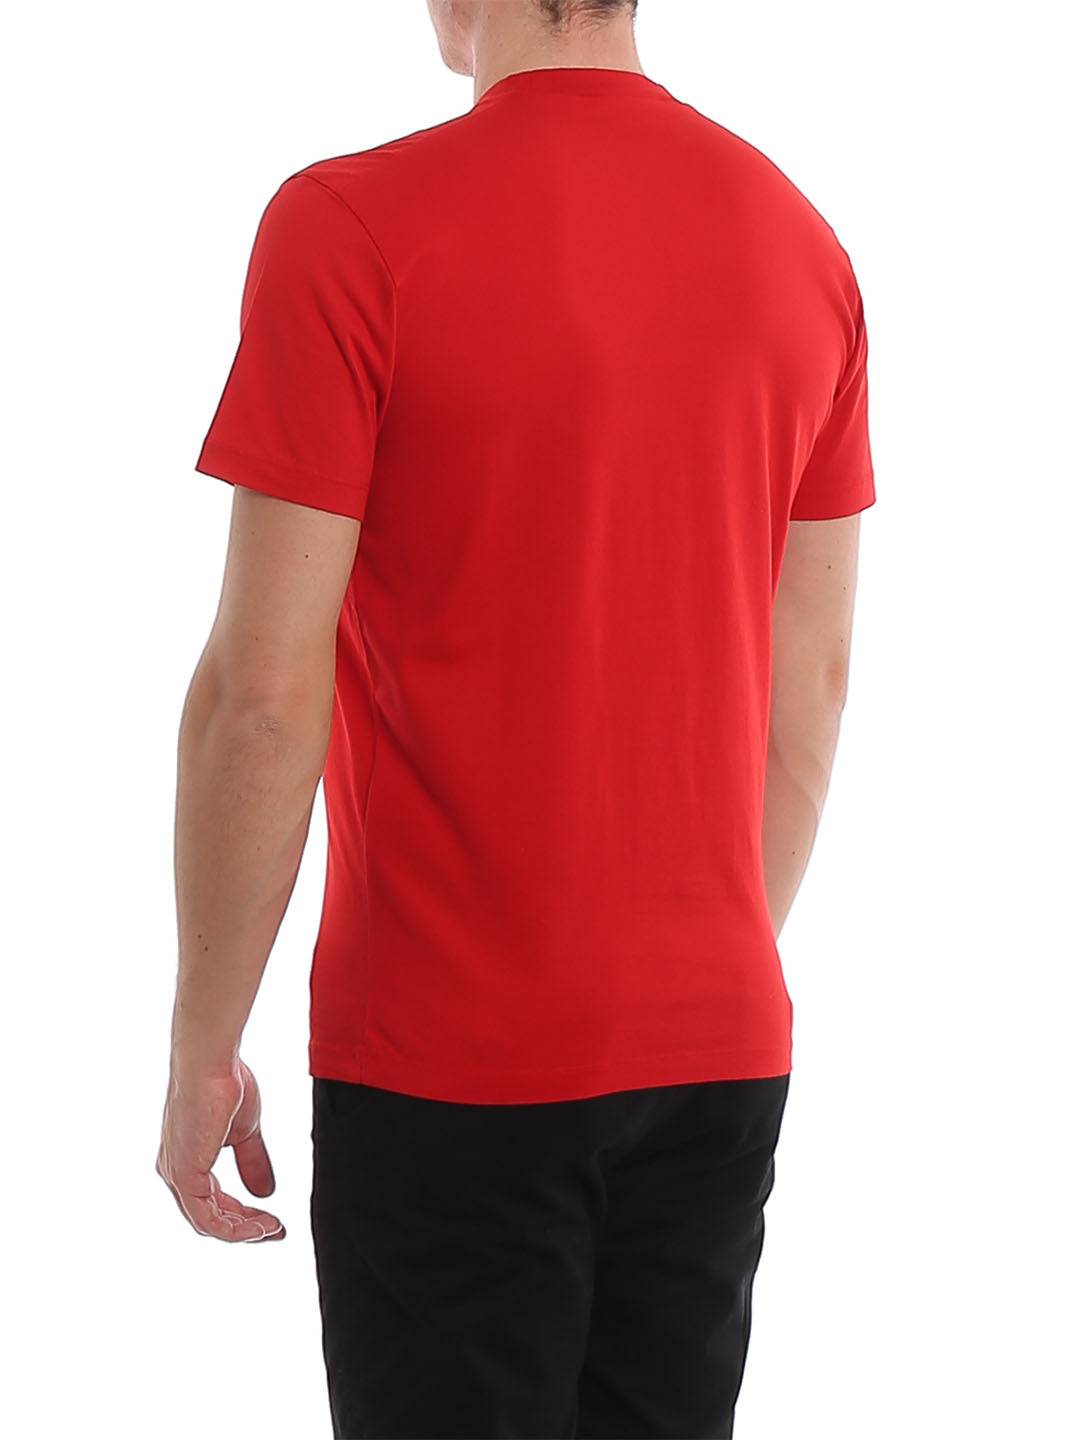 DSQUARED2 ICON red cotton T-shirt